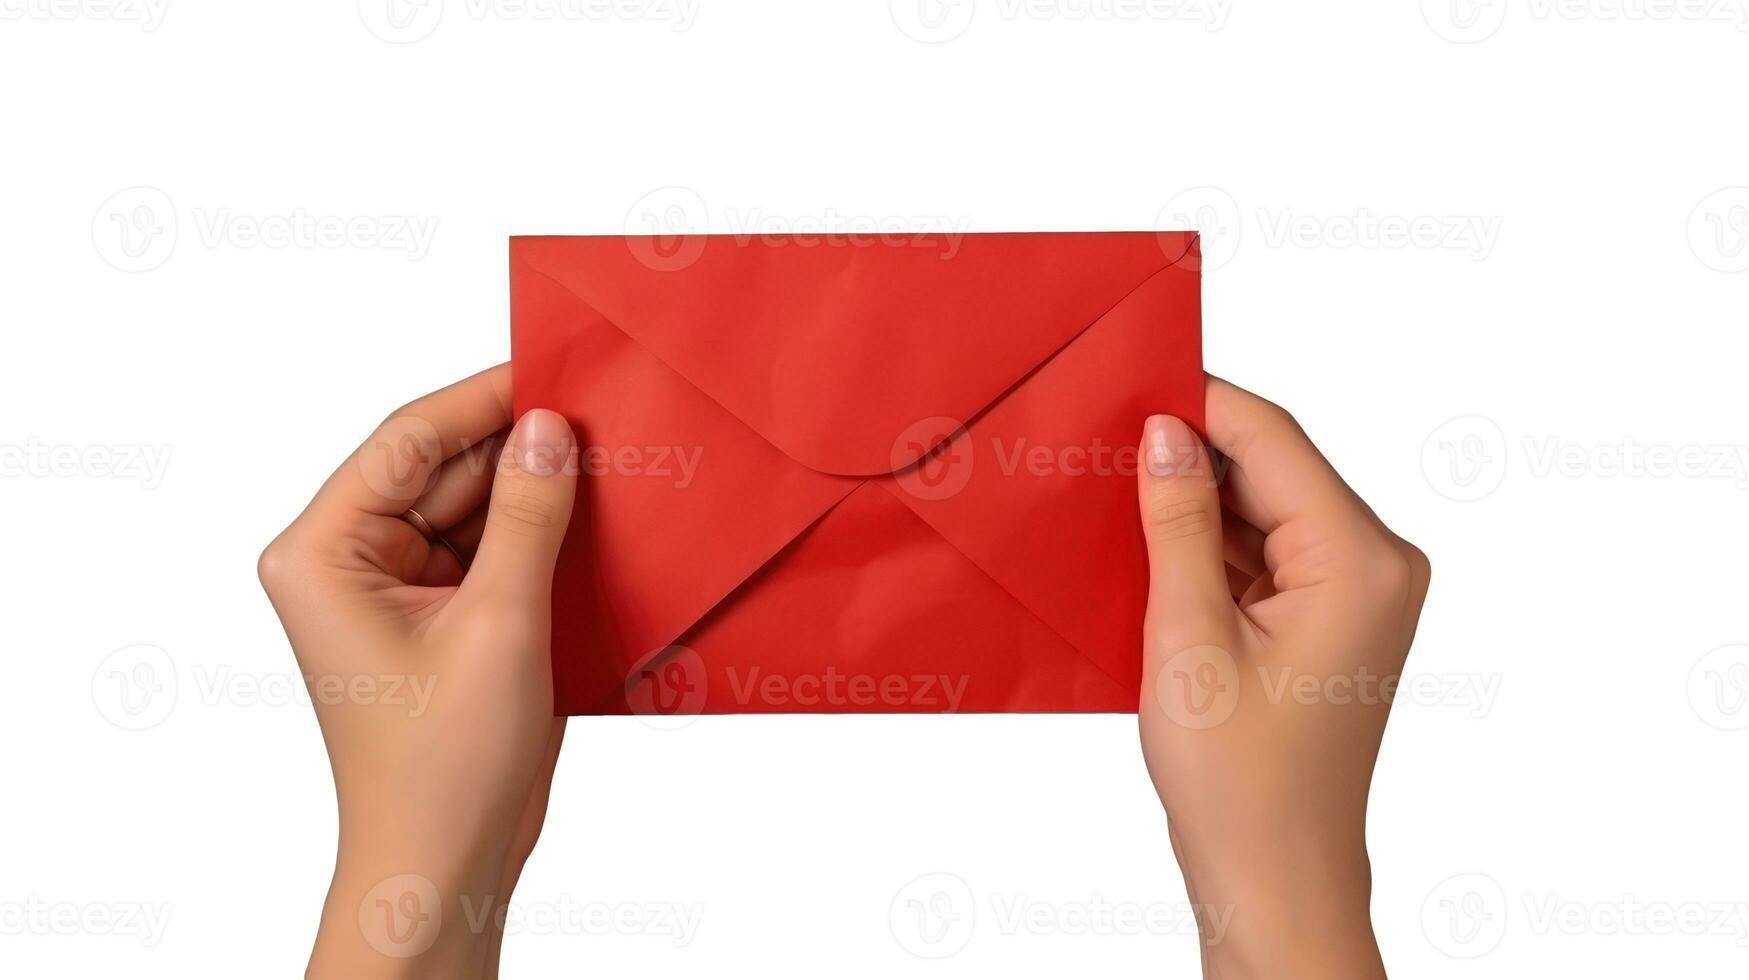 Top View of Human Hand Holding Red Envelope. photo